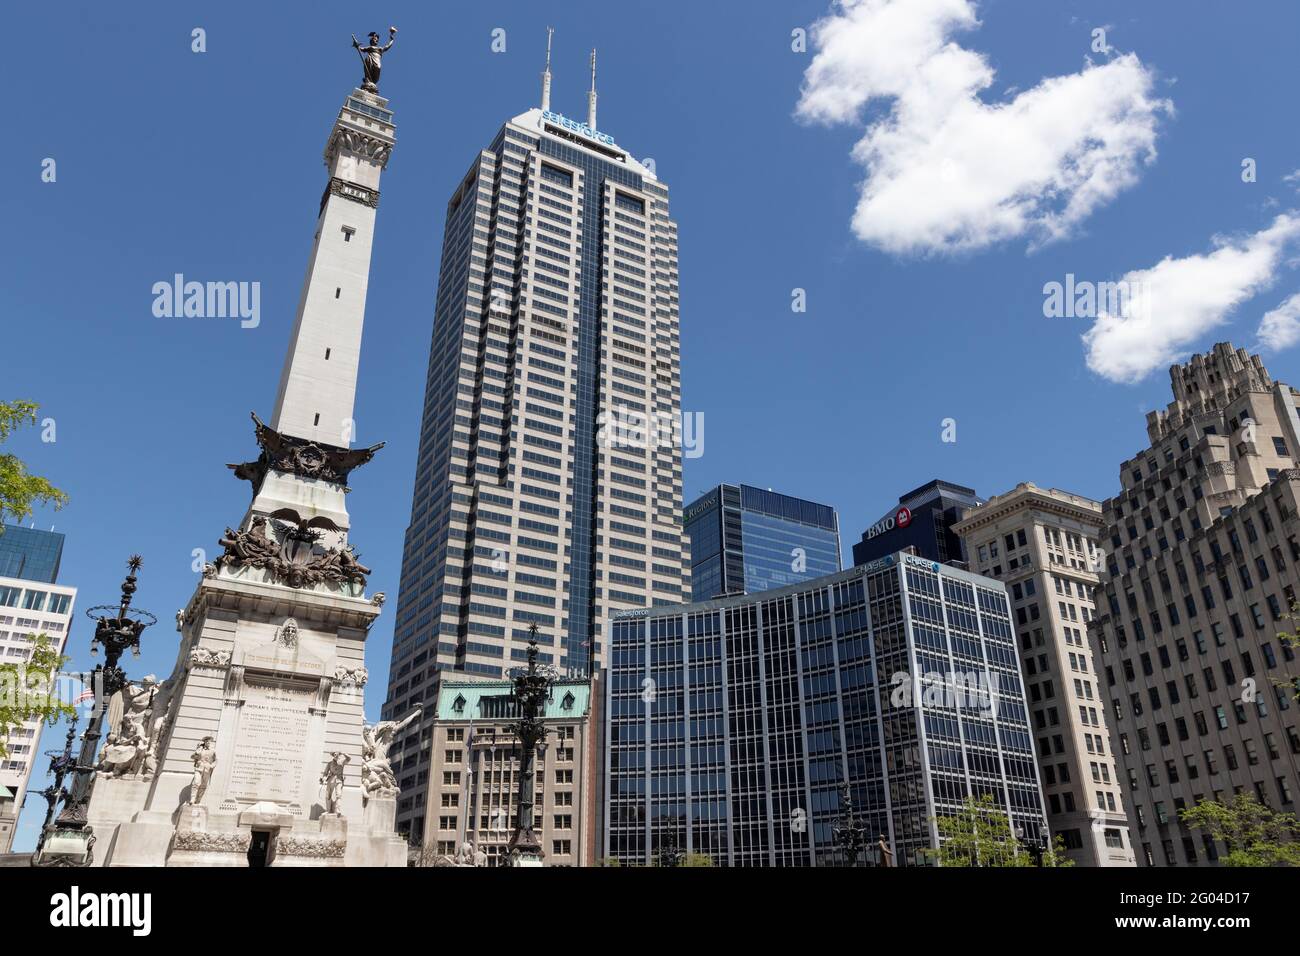 Indianapolis - Circa May 2021: Soldiers and Sailors Monument on the circle with the Salesforce Tower and Downtown in the background. Stock Photo